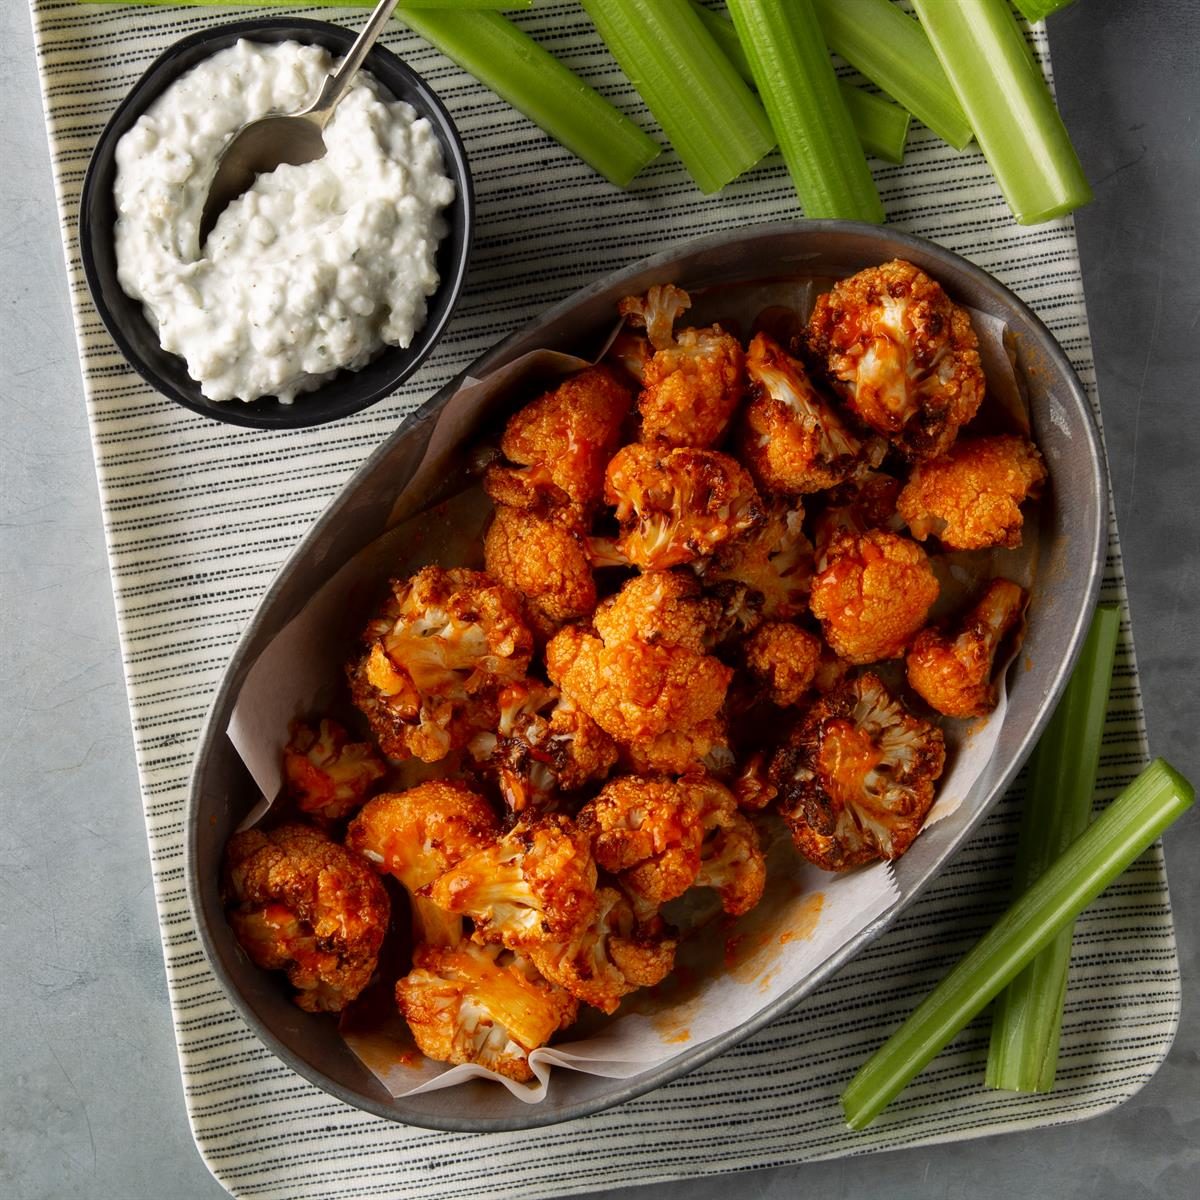 https://www.tasteofhome.com/wp-content/uploads/2020/03/Buffalo-Bites-with-Blue-Cheese-Ranch-Dip_EXPS_FT20_238642_F_0227_1.jpg